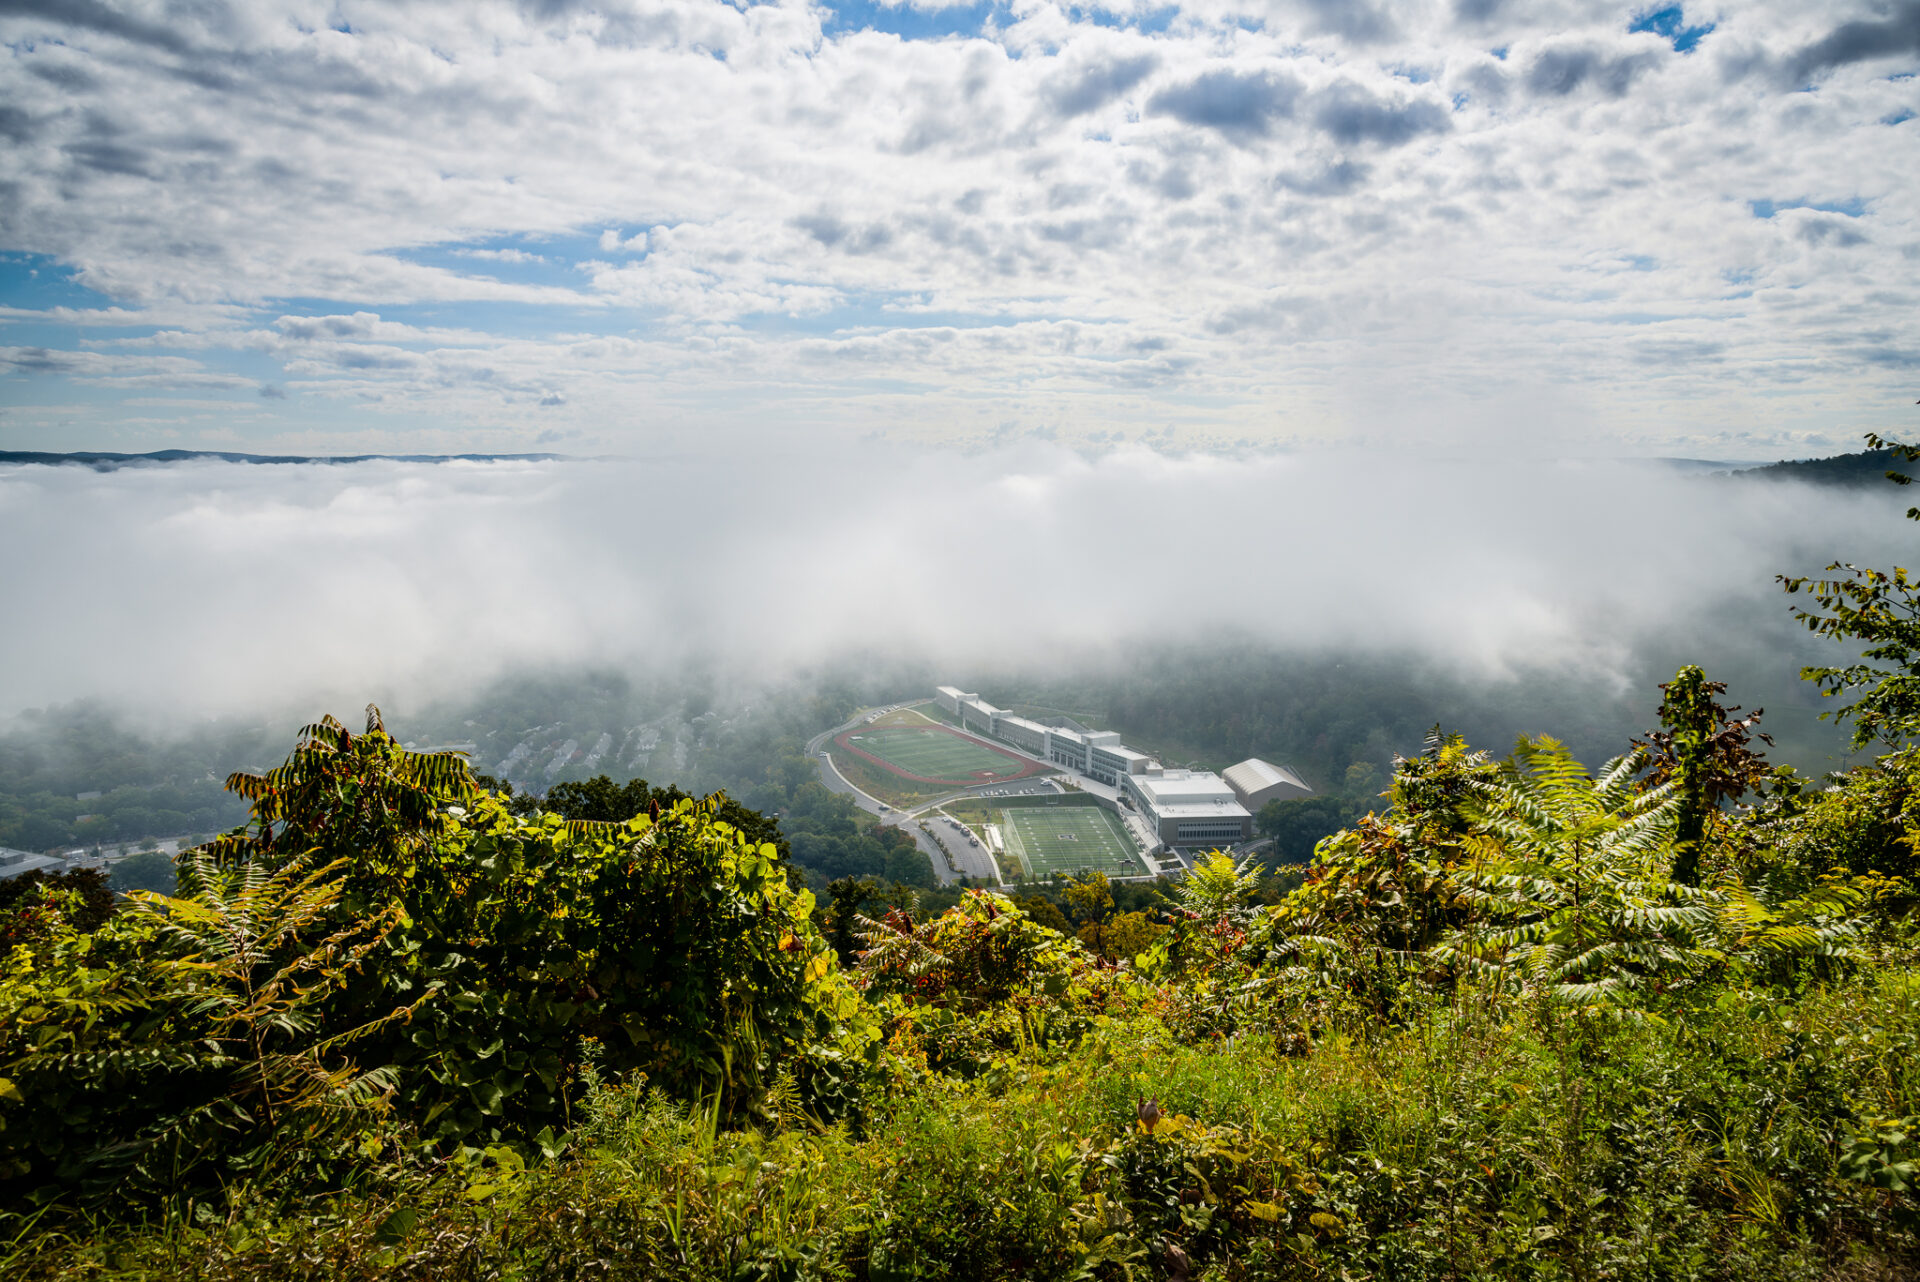 West Point football field in the cradle of clouds and fog